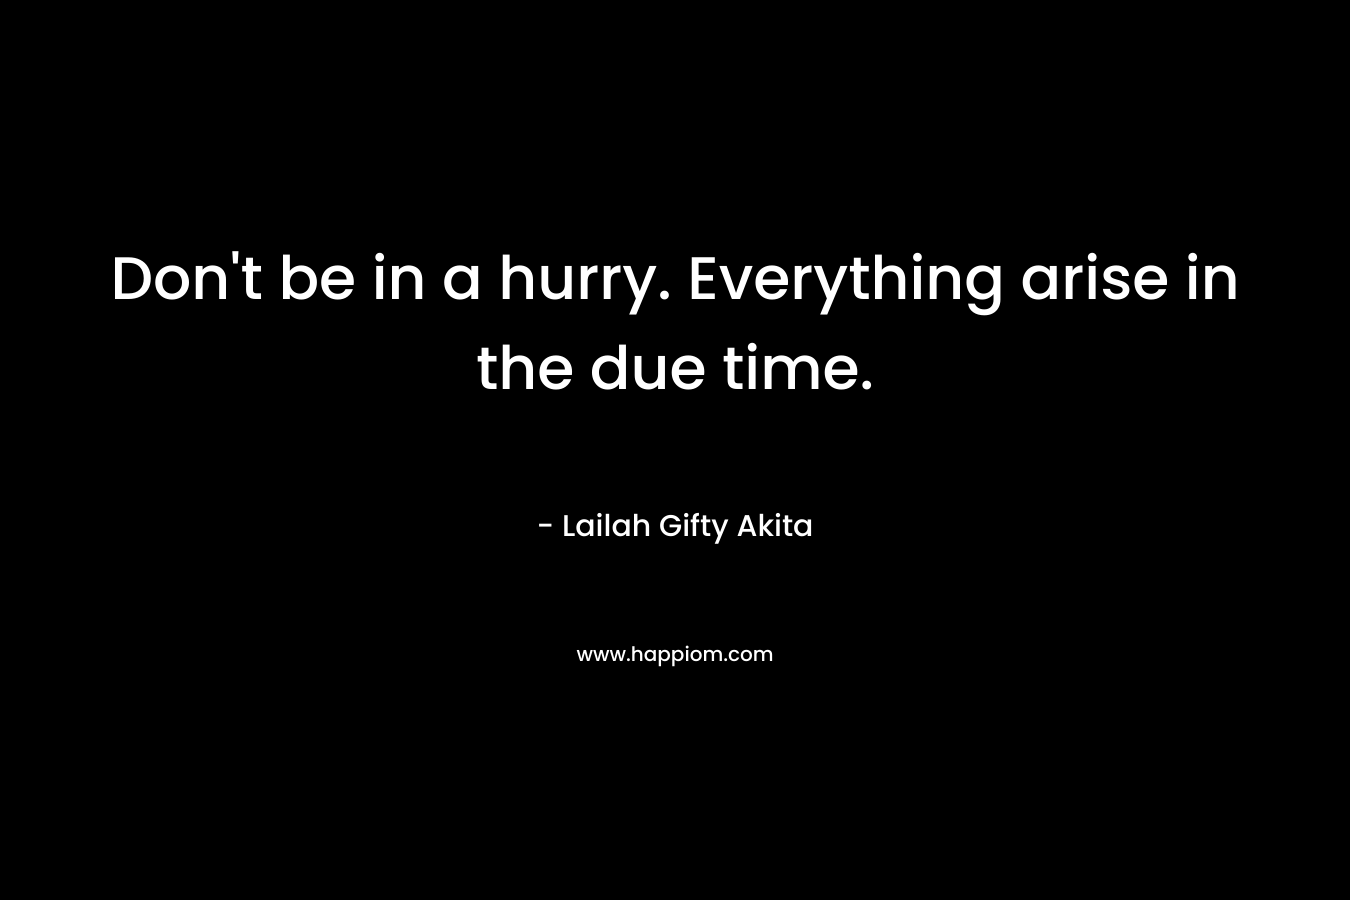 Don't be in a hurry. Everything arise in the due time.